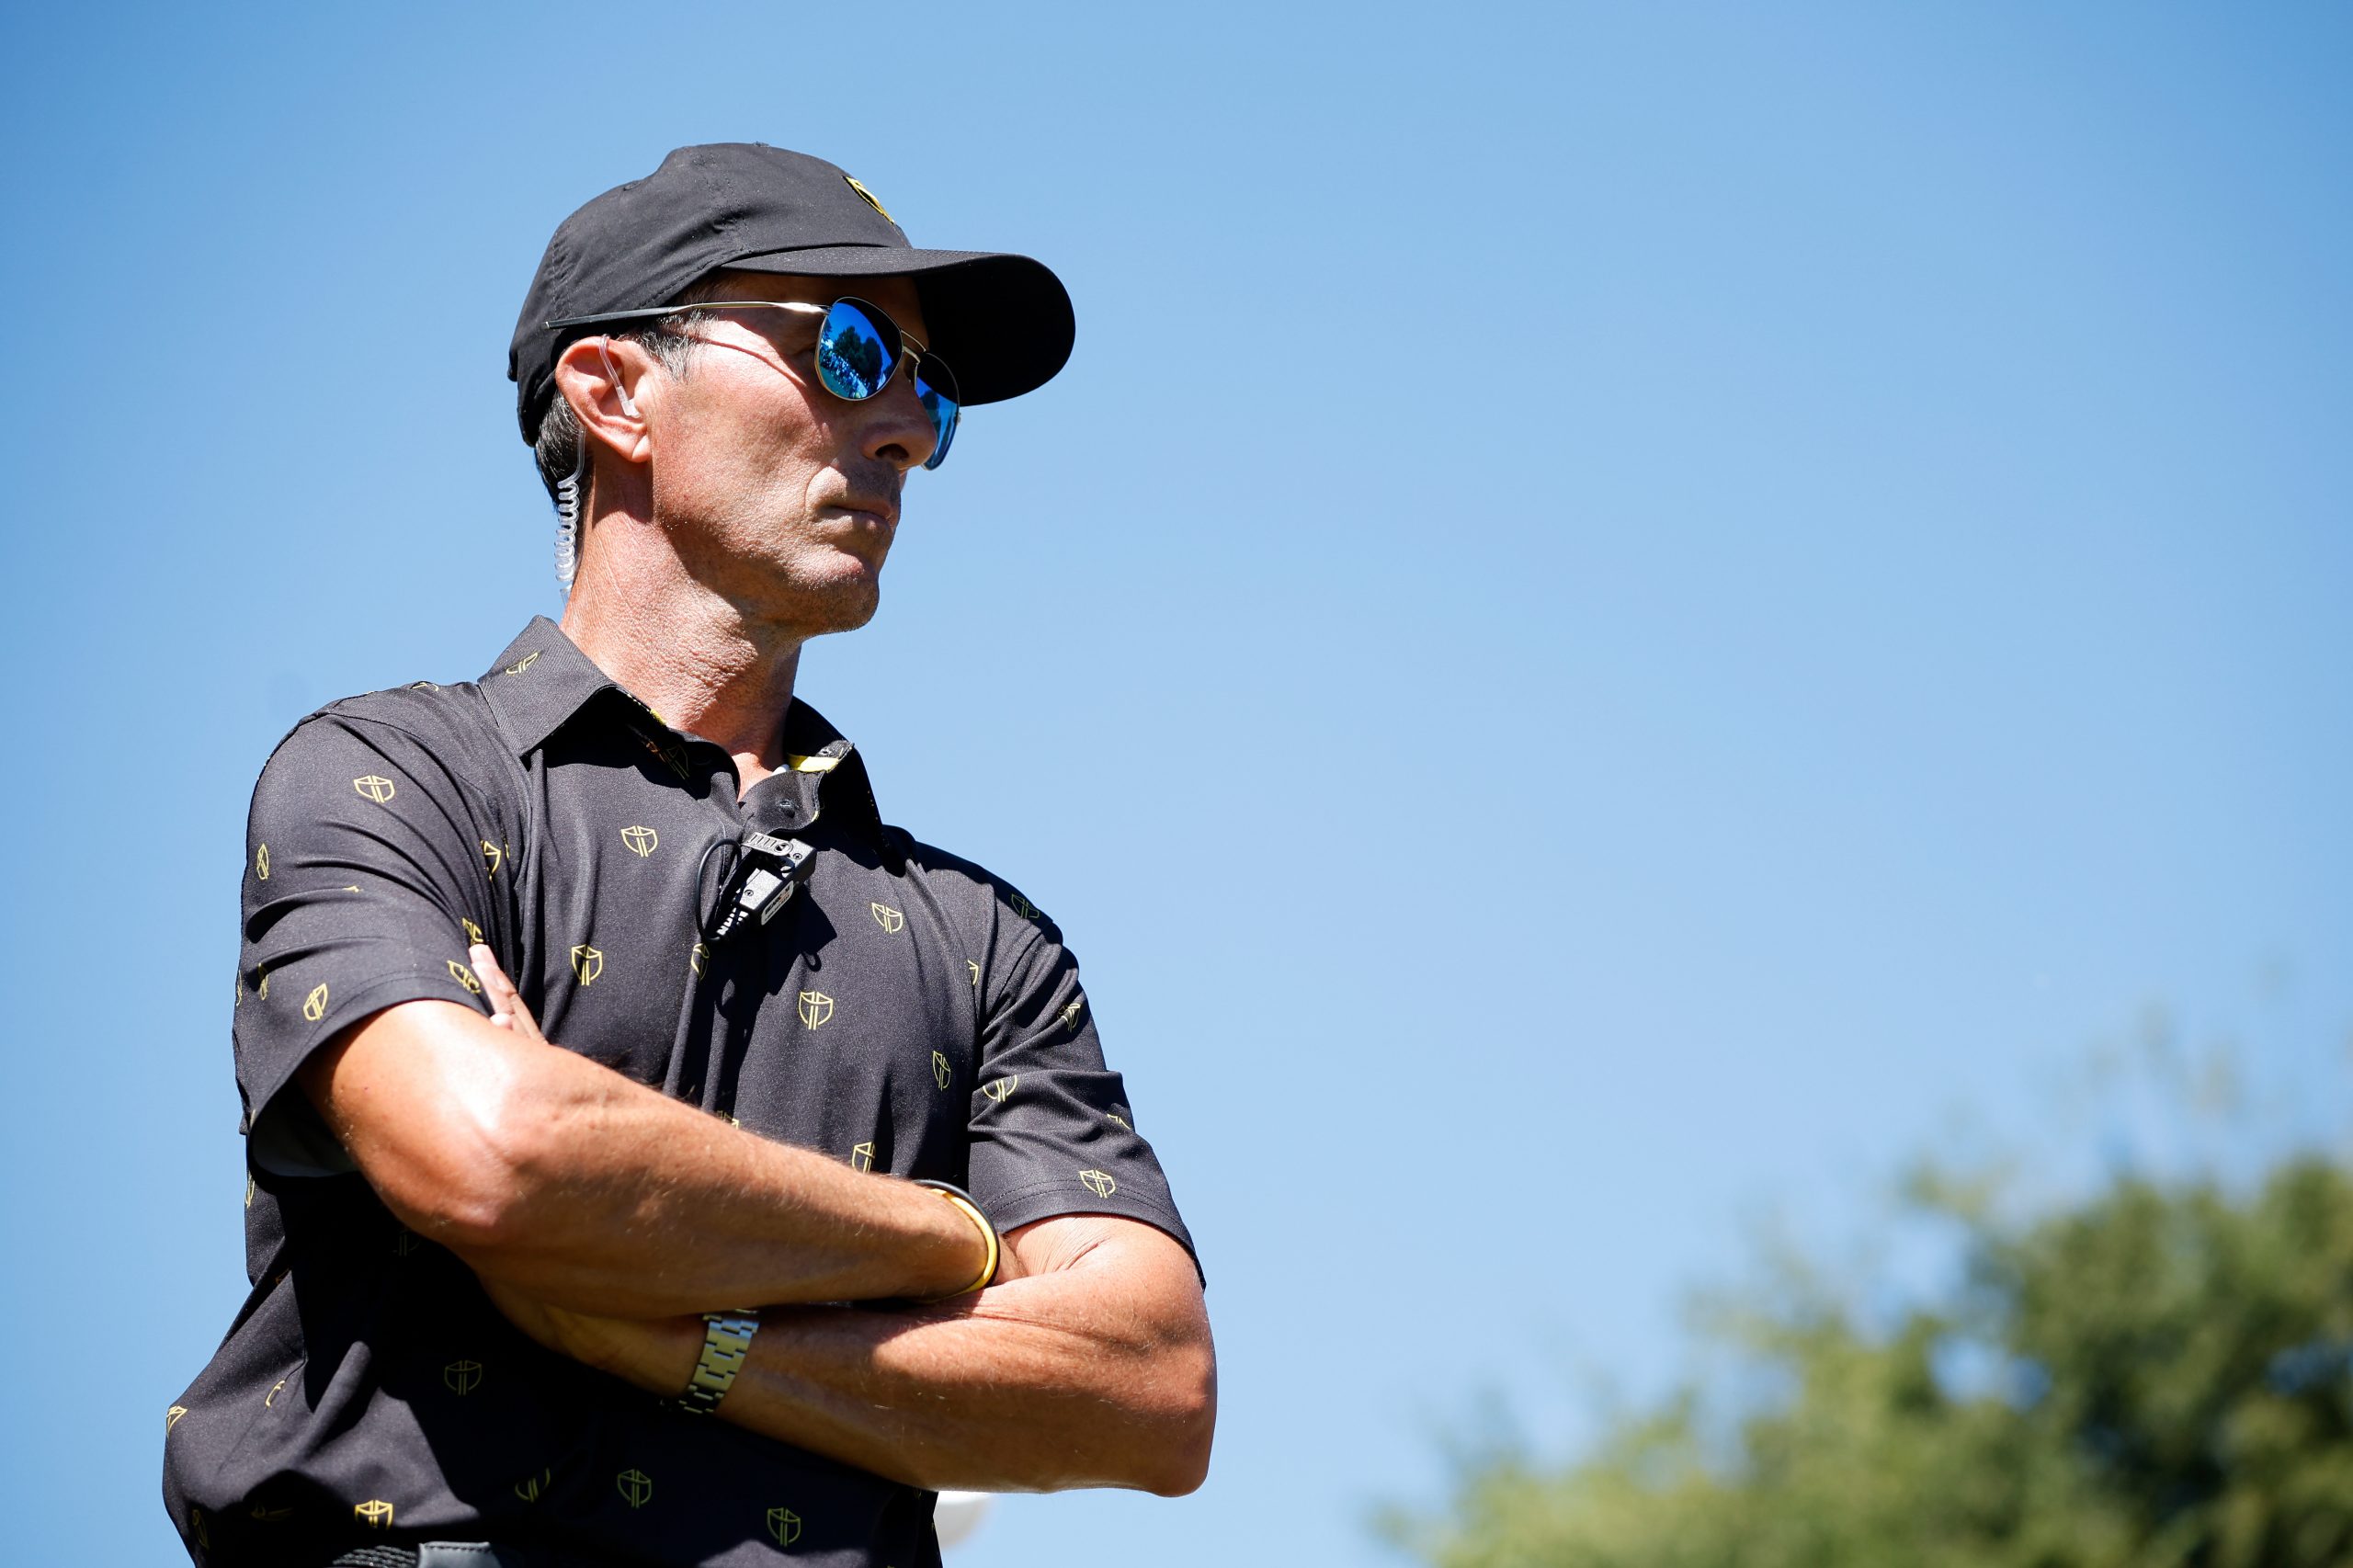 Five-time Presidents Cup player Mike Weir named International Team Captain for 2024 Presidents Cup